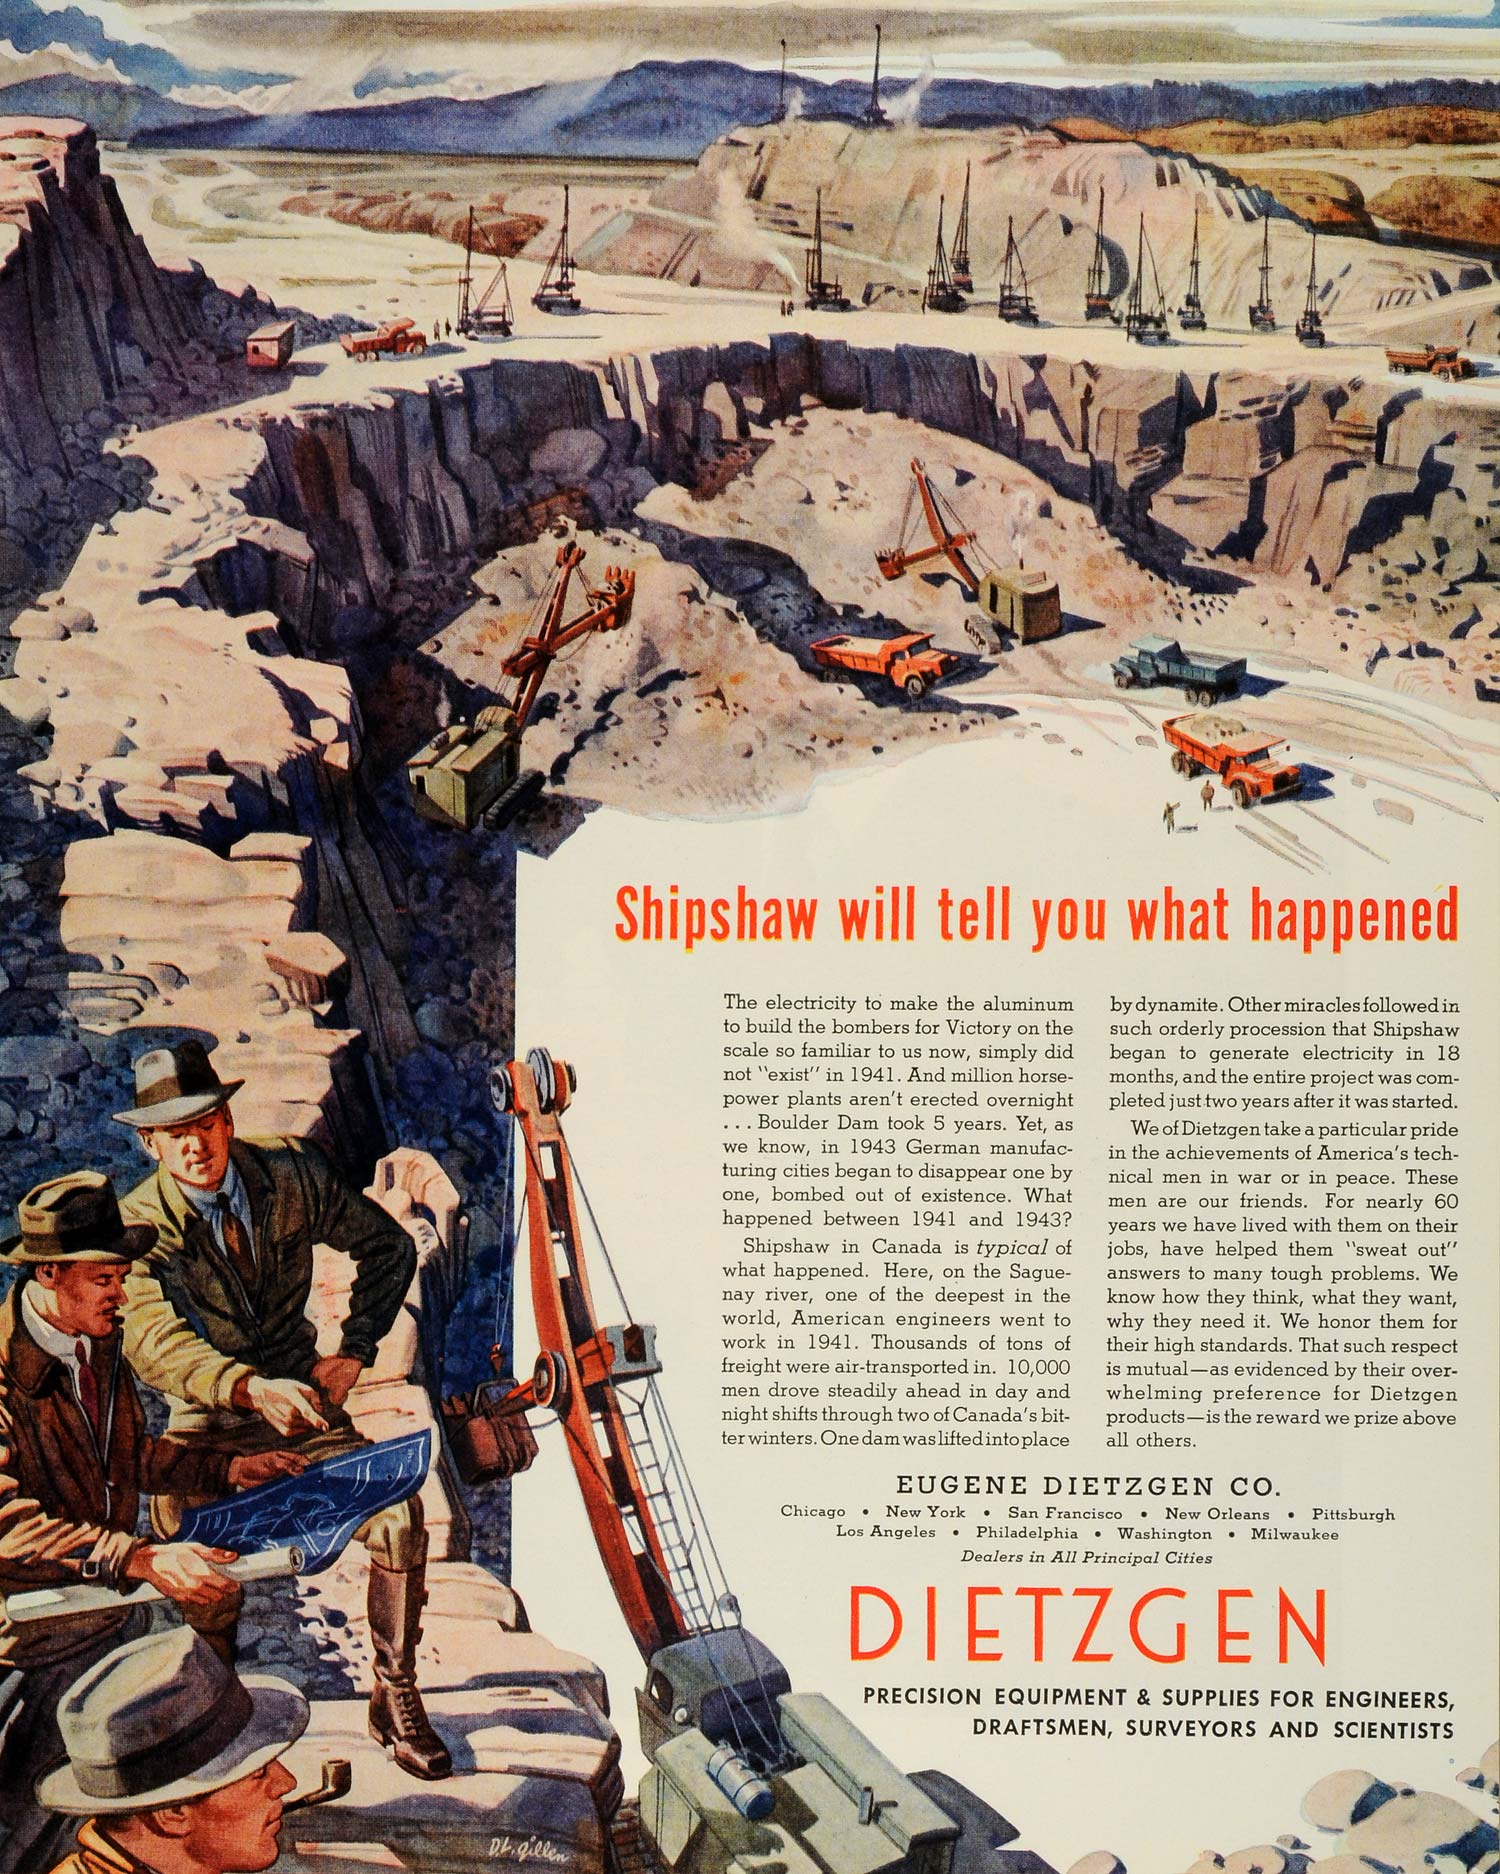 1944 Ad WWII Eugene Dietzgen Engineers Surveyors Drafting War Production FZ6